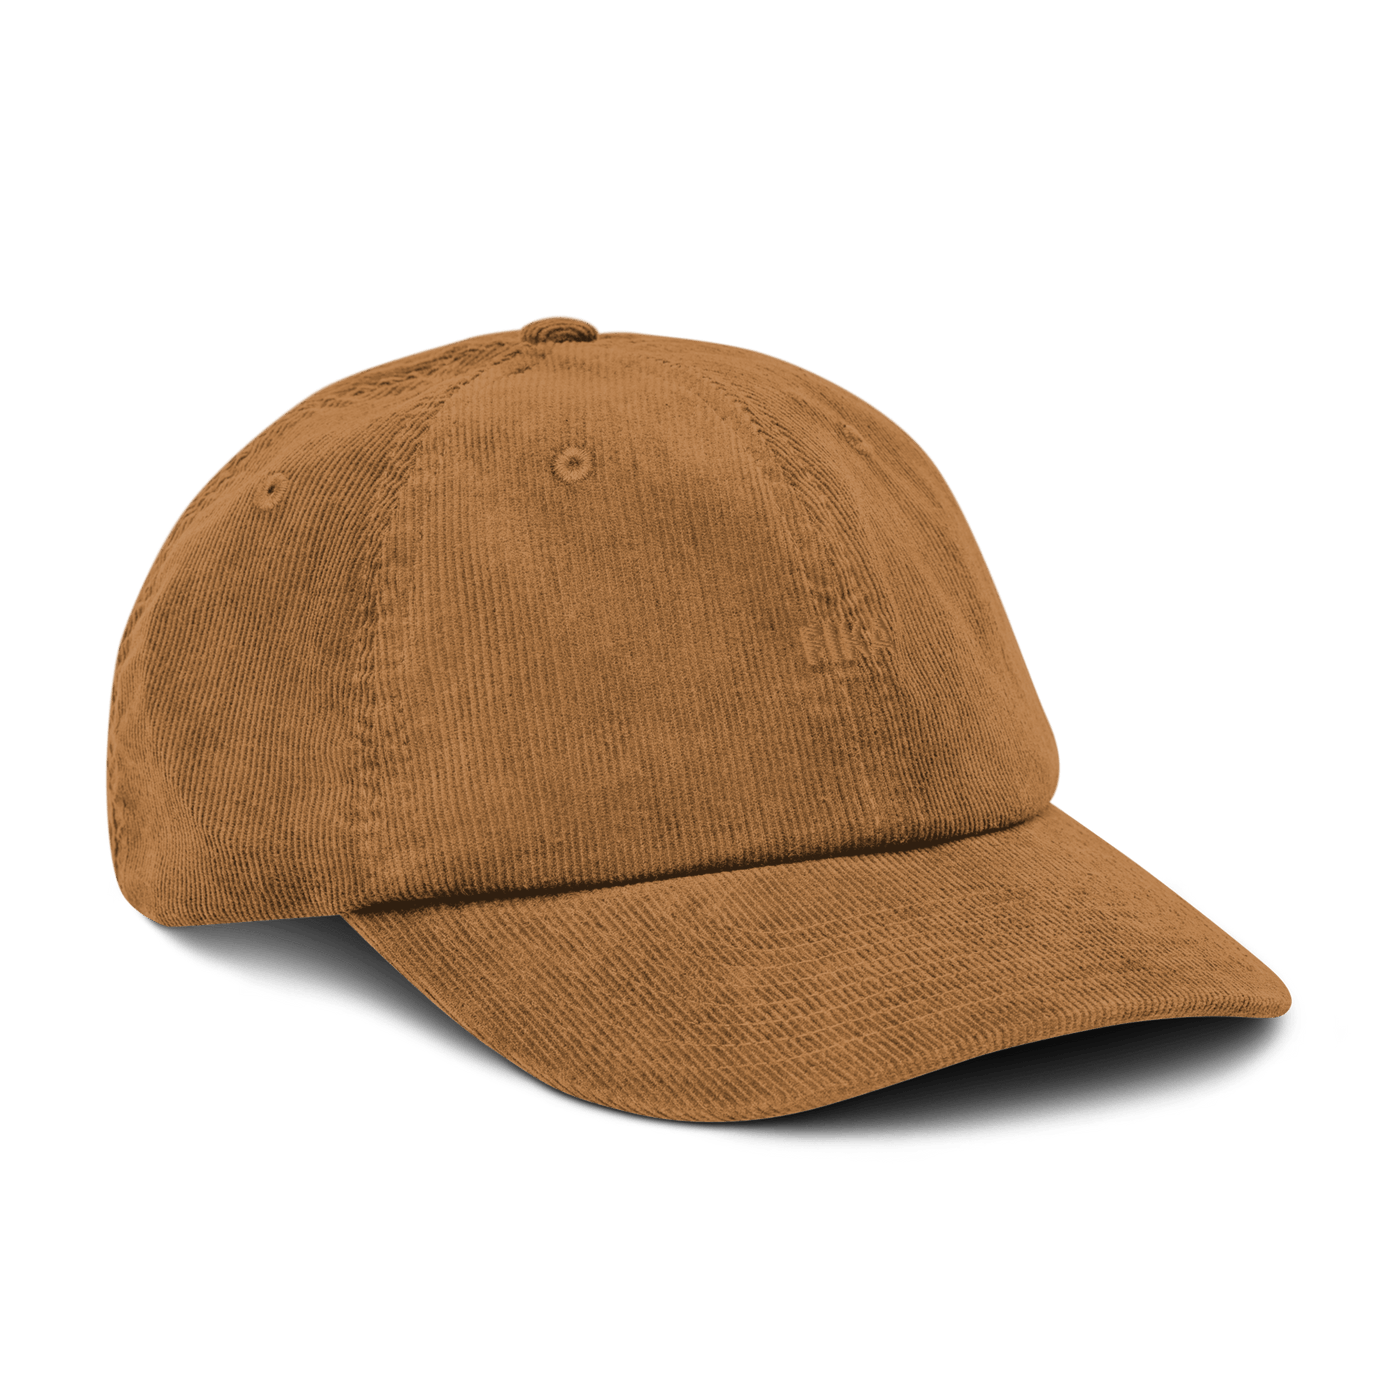 FIKA Corduroy hat - Camel - - Just Another Cap Store